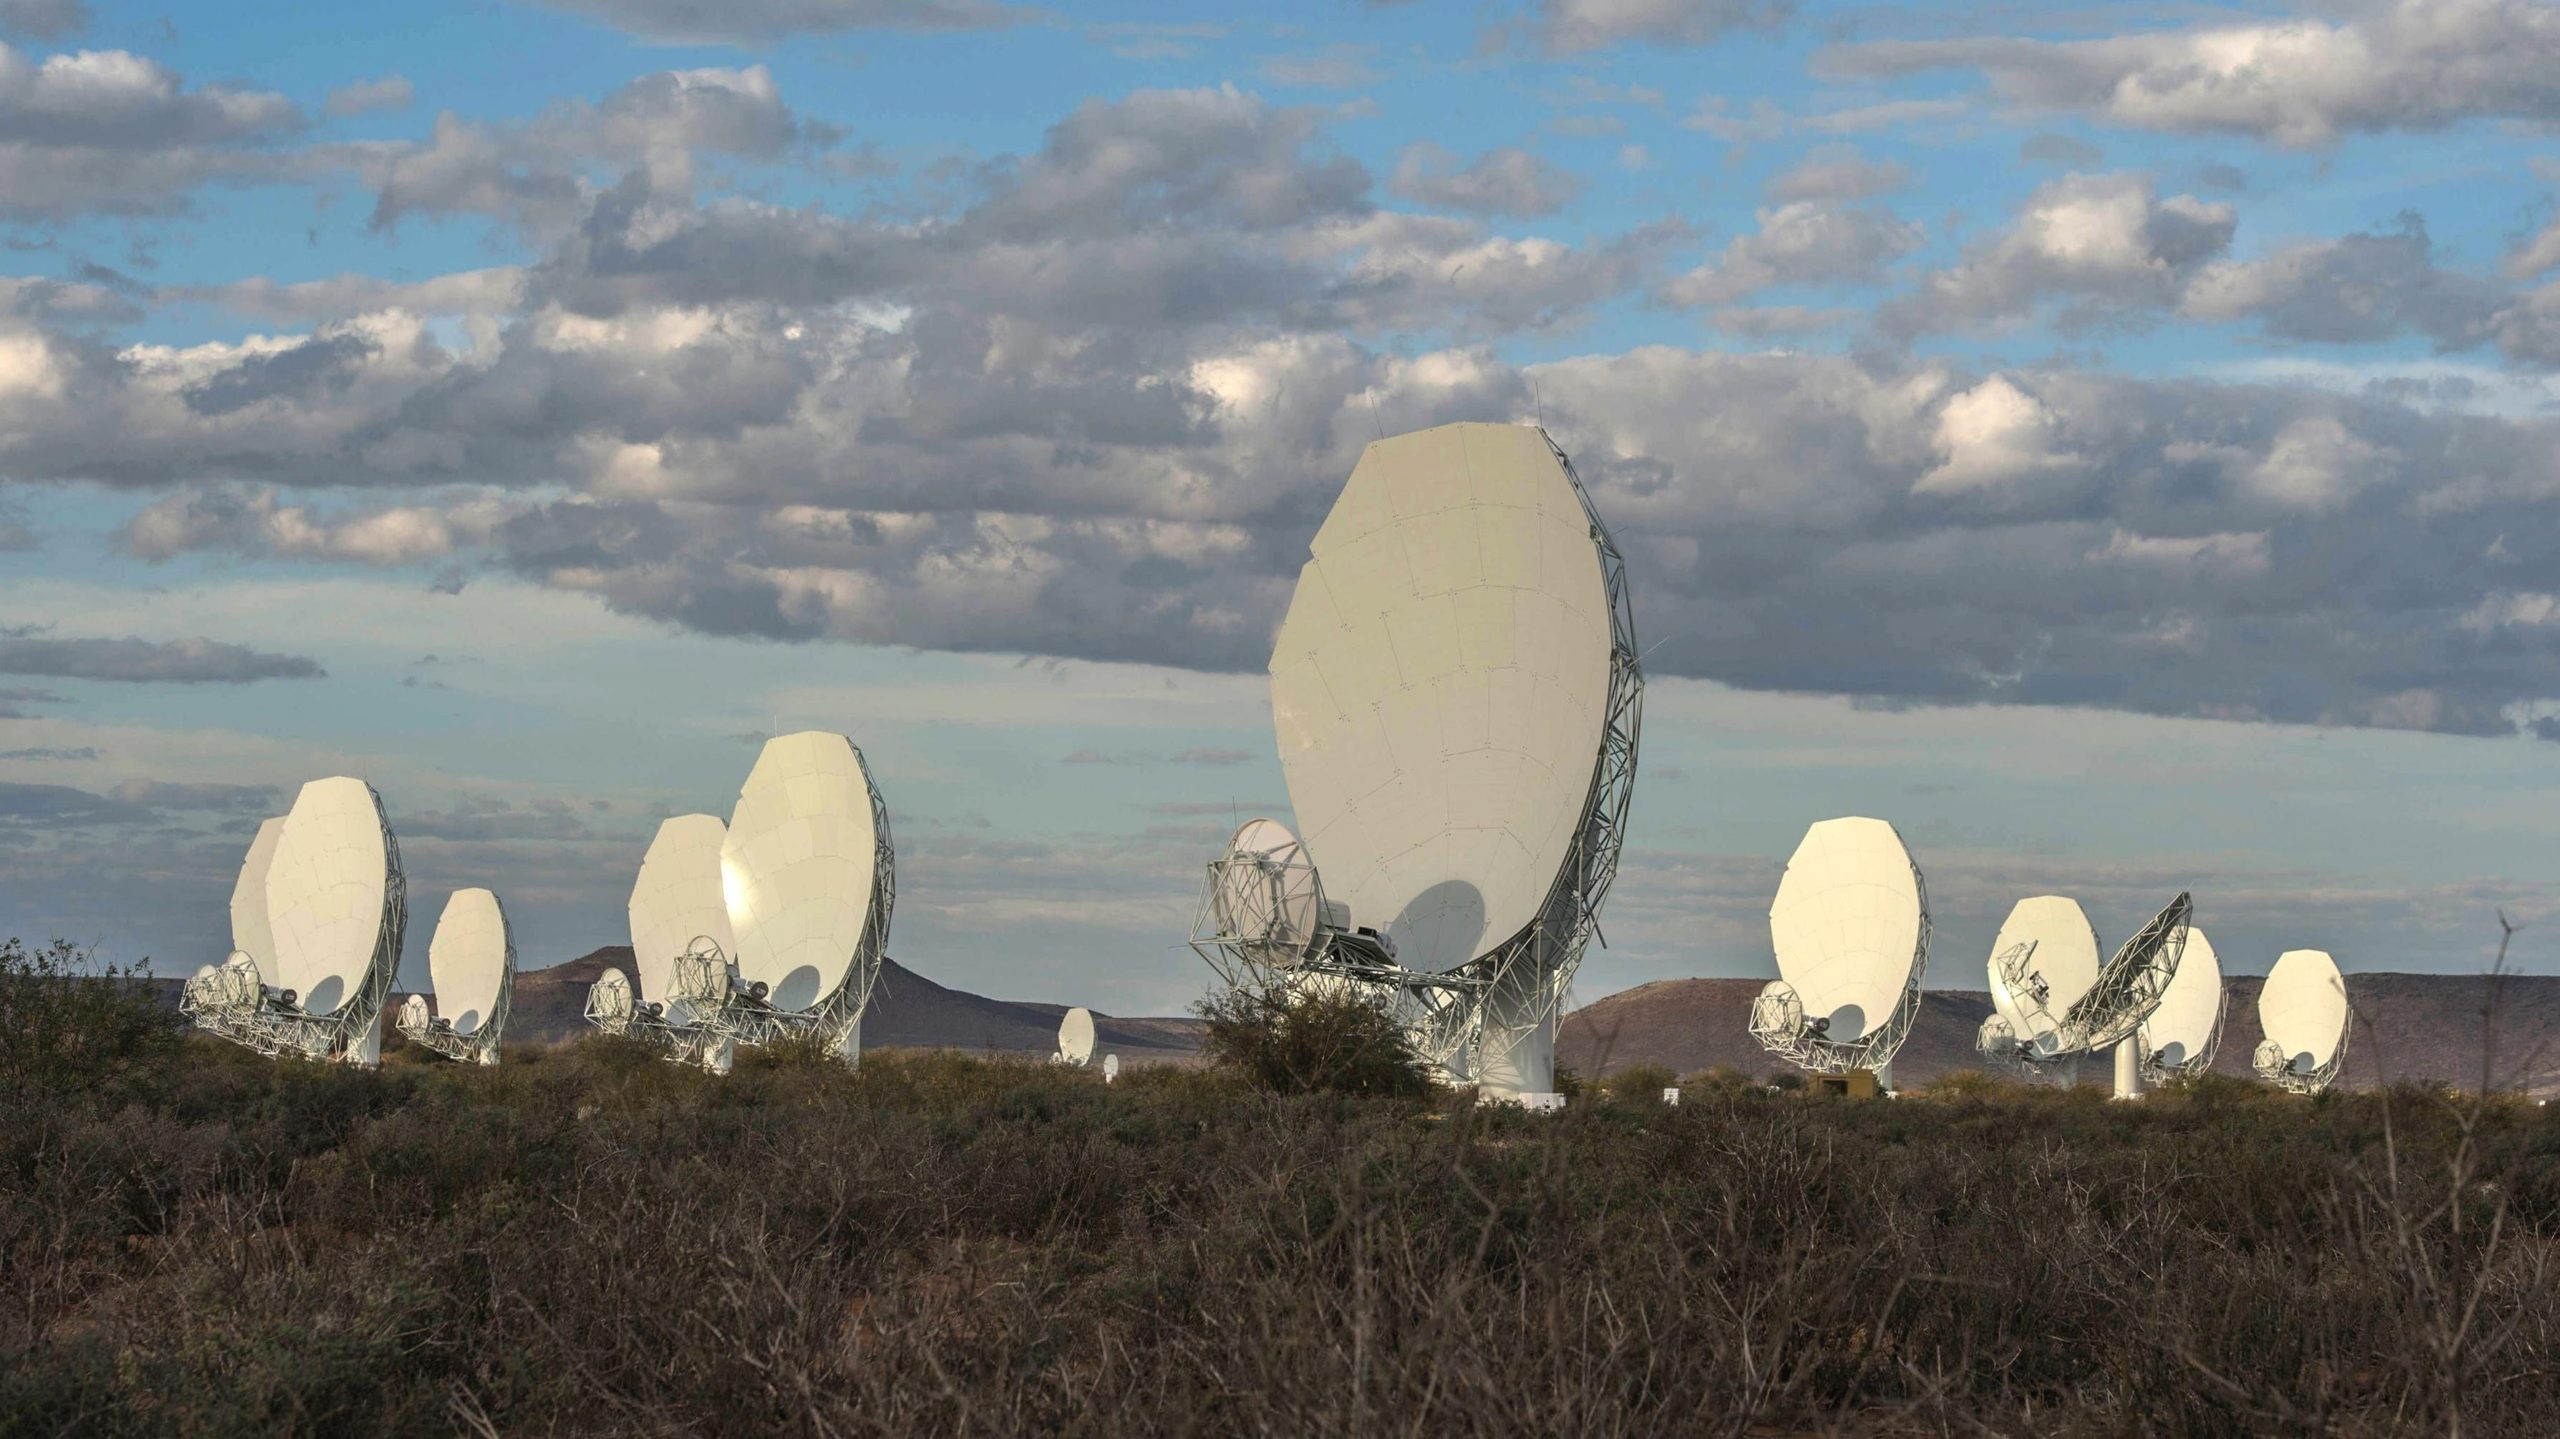 The 64-dish MeerKAT telescope array in South Africa in 2018. (Photo: MUJAHID SAFODIEN / AFP, Getty Images)